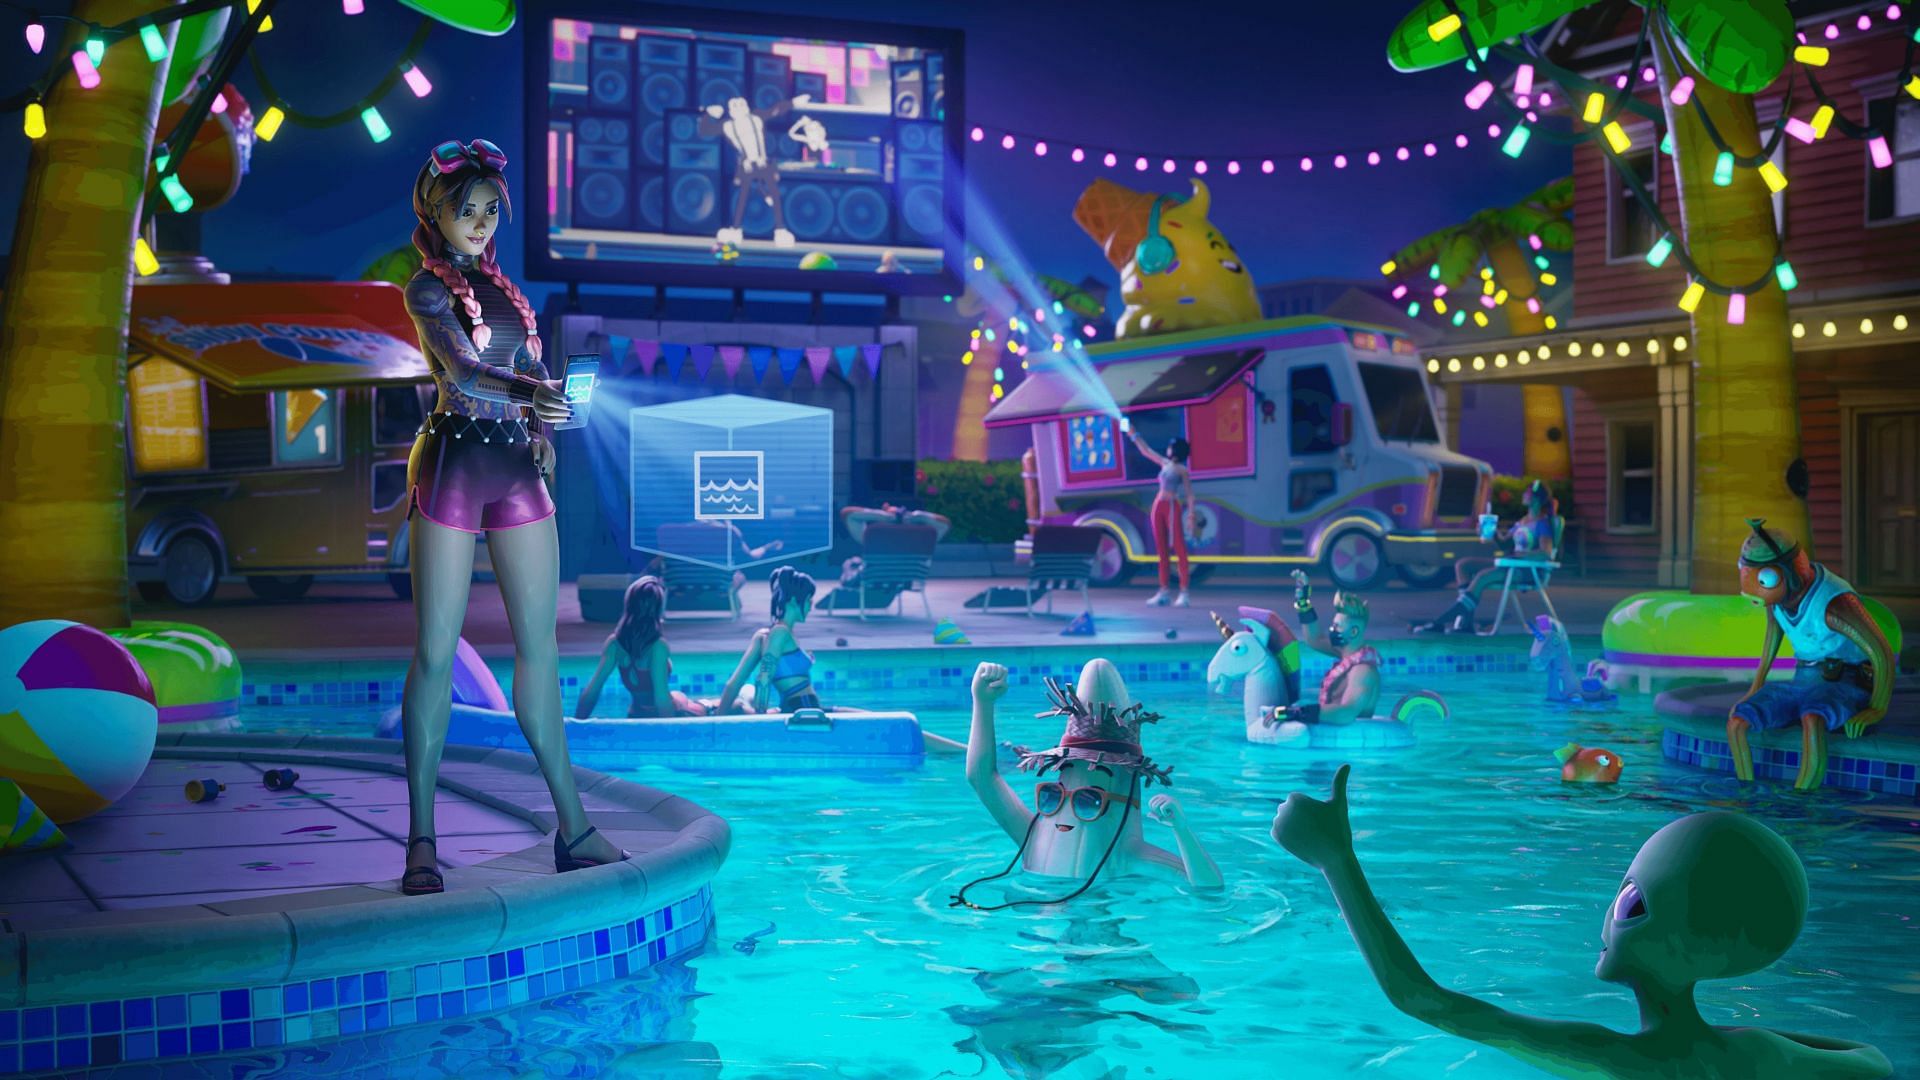 Epic Games has announced a new Fortnite event for Summer 2022 (Image via Epic Games)